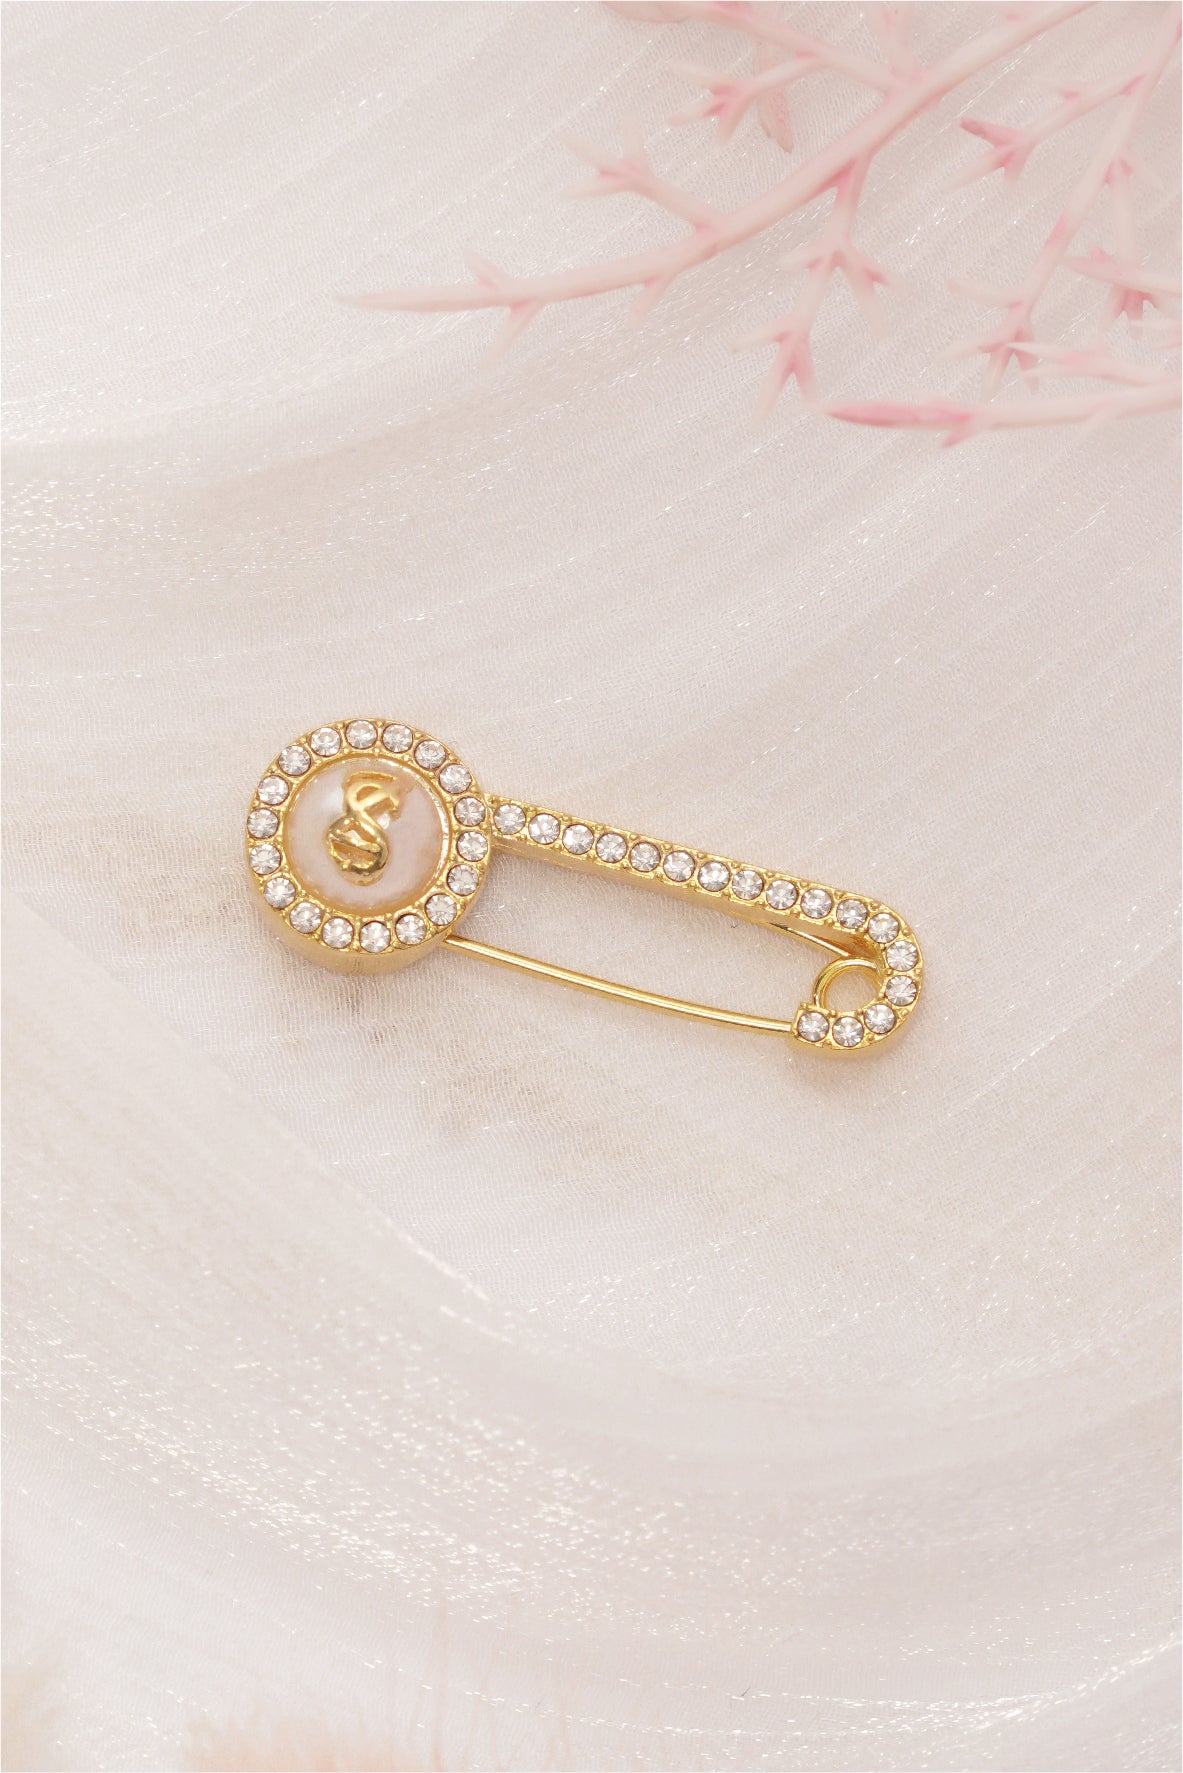 Safety Hijab Pin With Pearl - Gold